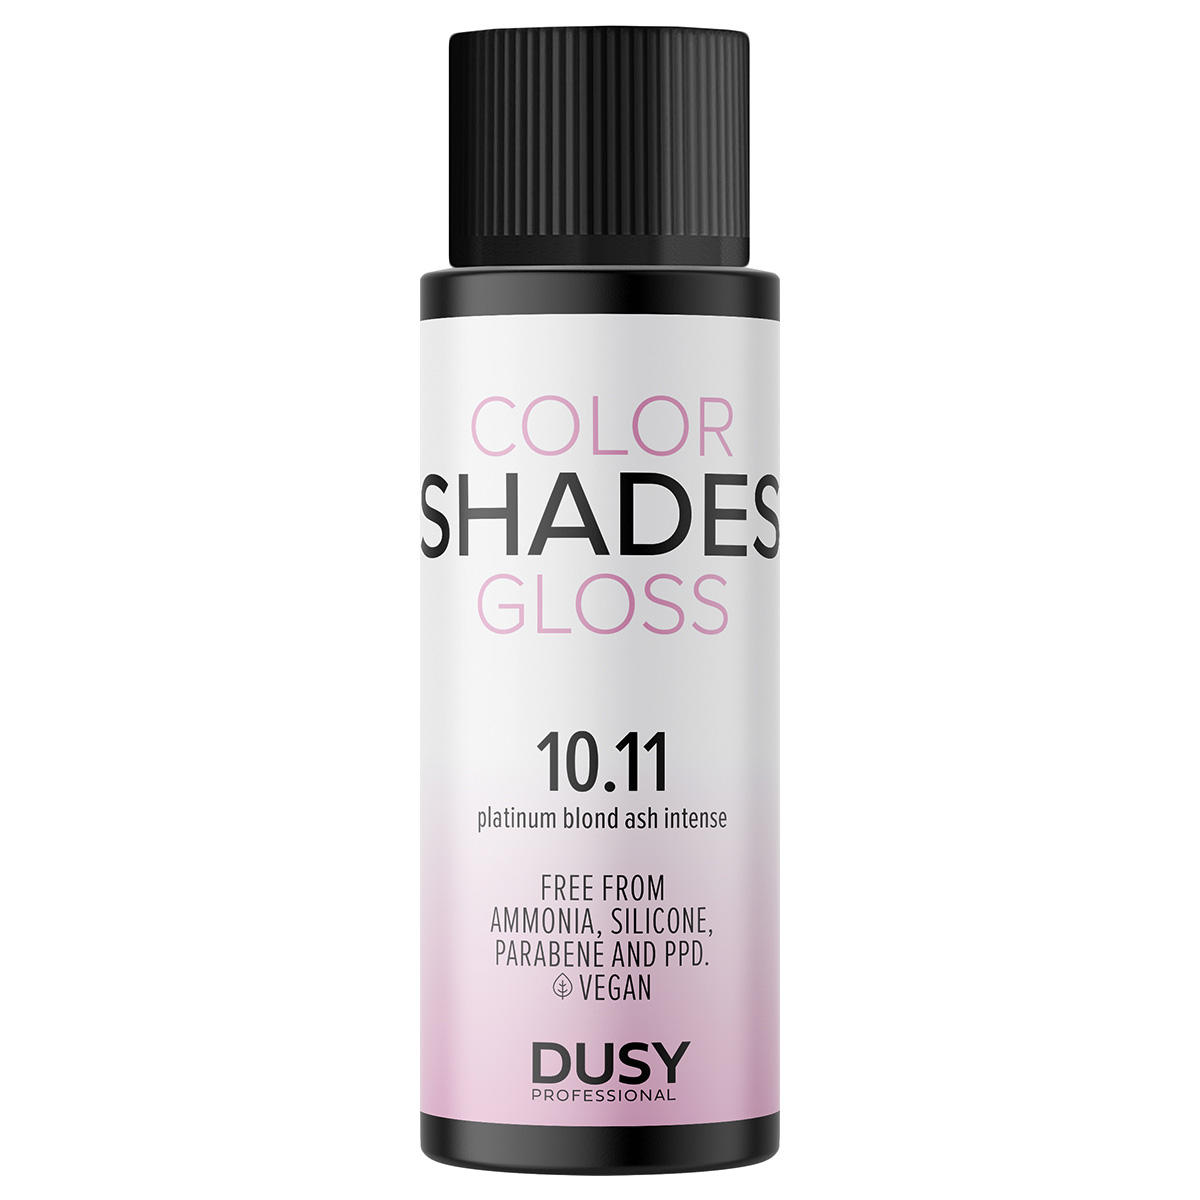 dusy professional Color Shades Gloss 10.11 Platin Blond Asch Intensiv 60 ml - 1